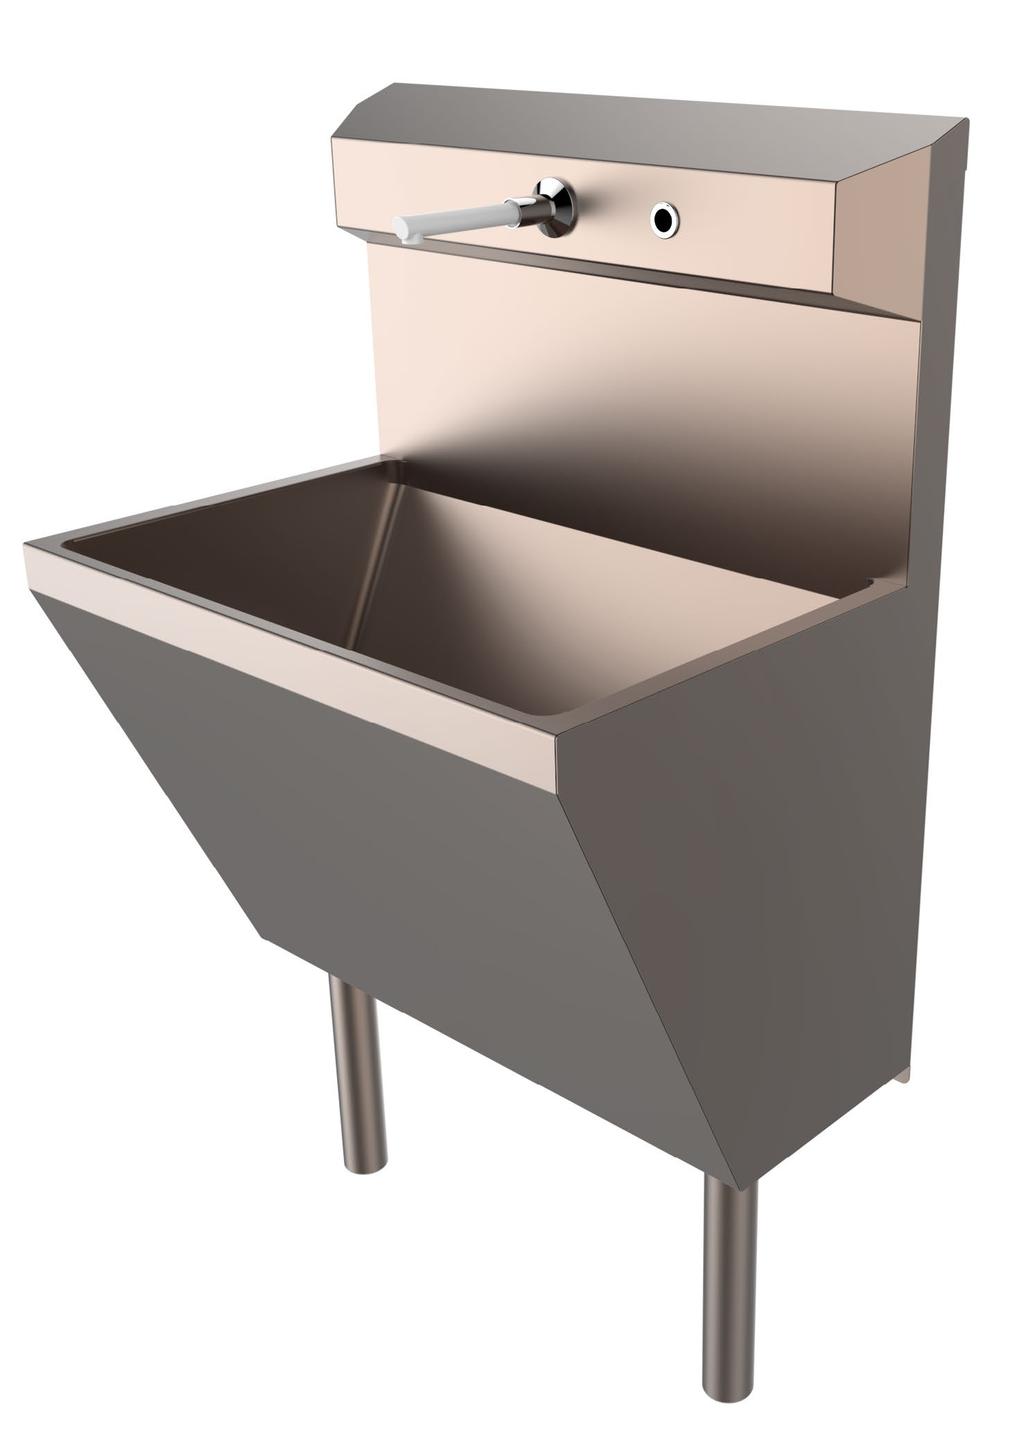 TECHNIK Medical - Surgical Scrub Sink Manufactured from Antimicrobial Copper Within the medical and healthcare industries infections cost society thousands of lives and billions of pounds each year.